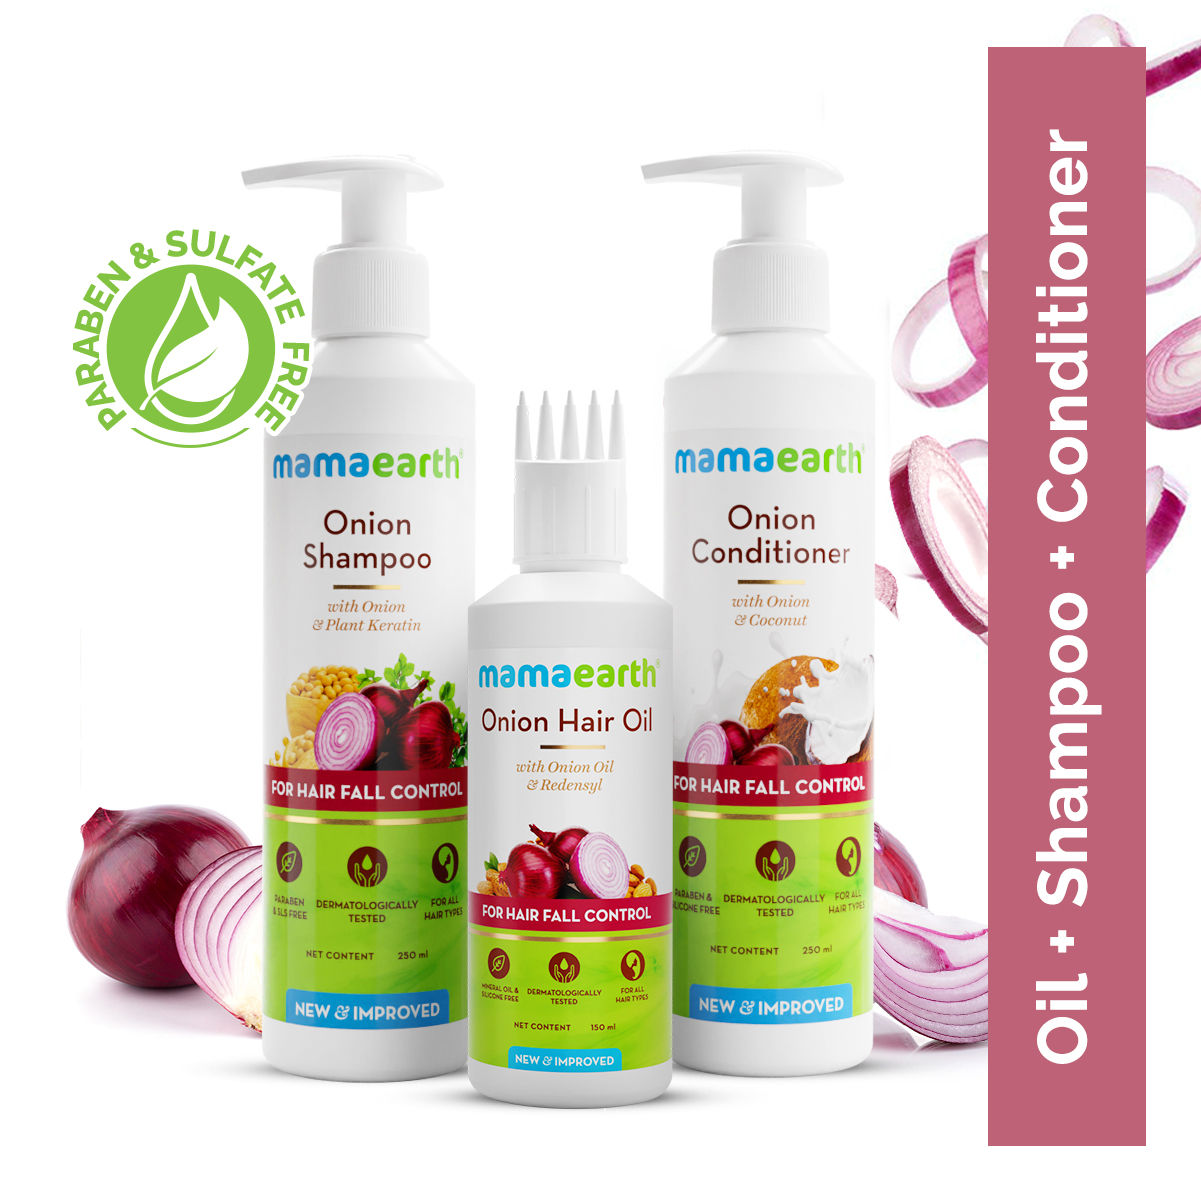 Buy mamaearth Onion Hair Fall Shampoo with Onion Oil & Plant Keratin - 250  ml AND Mamaearth Onion Hair Oil With Onion And Redensyl - 250 ml Online at  Firstcry.com